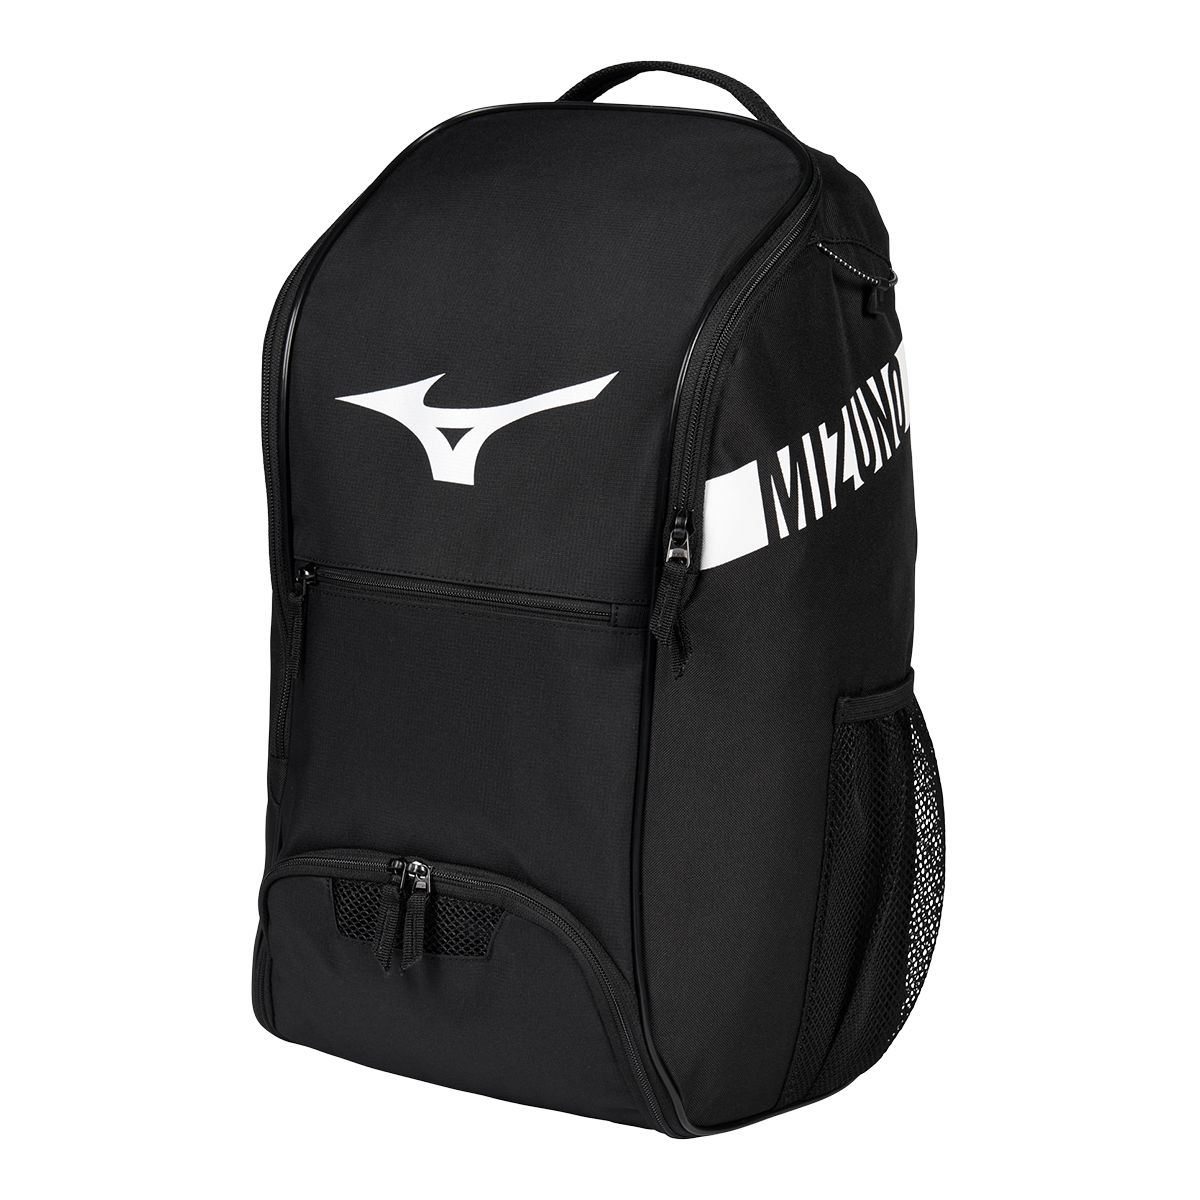 Image of Mizuno Crossover 22 Backpack